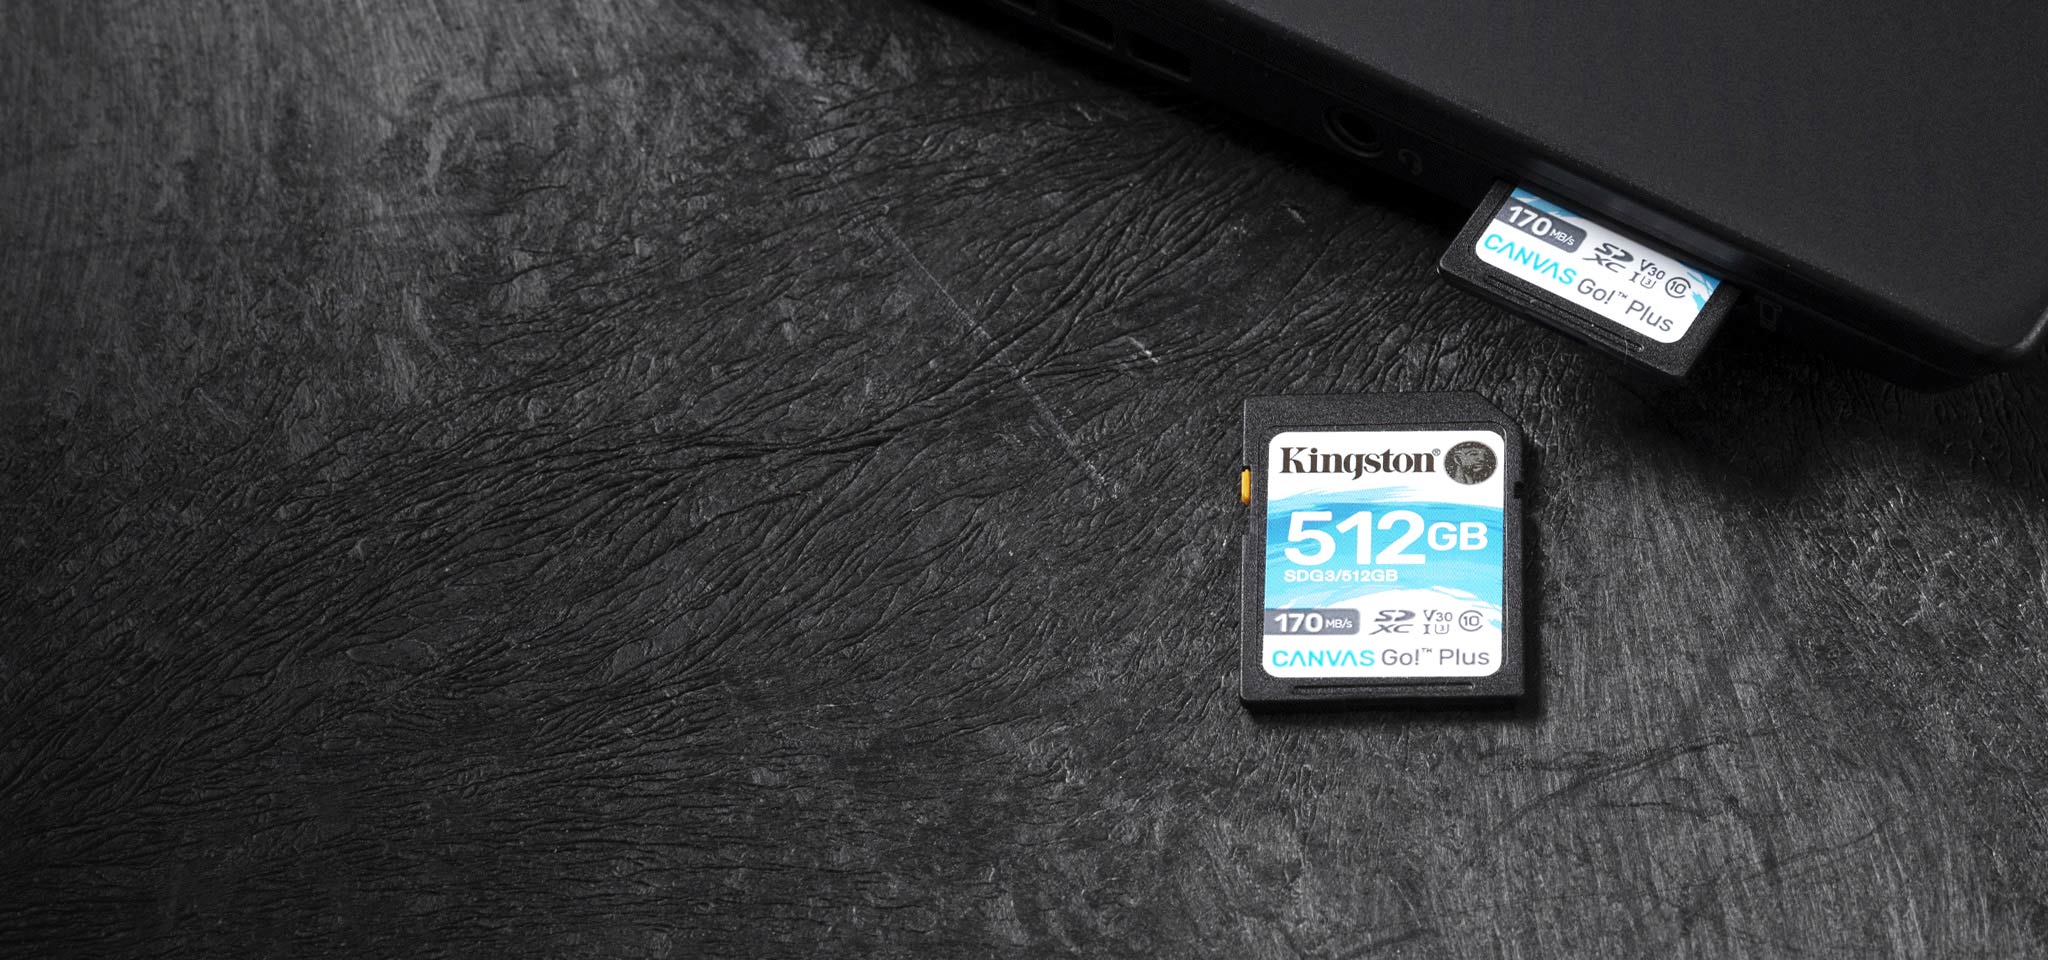 Kingston SDG/32GB SD Canvas Go Ideal for DSLRs Drones and Other SD-Card Compatible Action Cameras